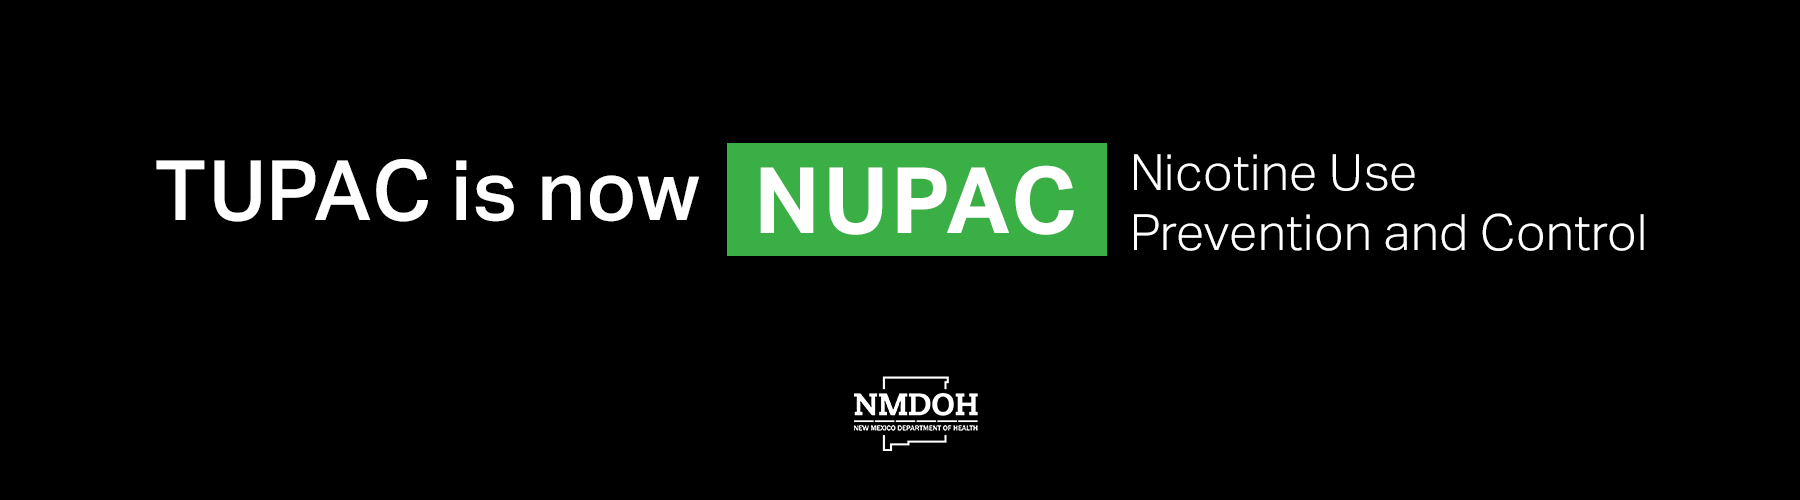 Banner says Tupac is now Nupac